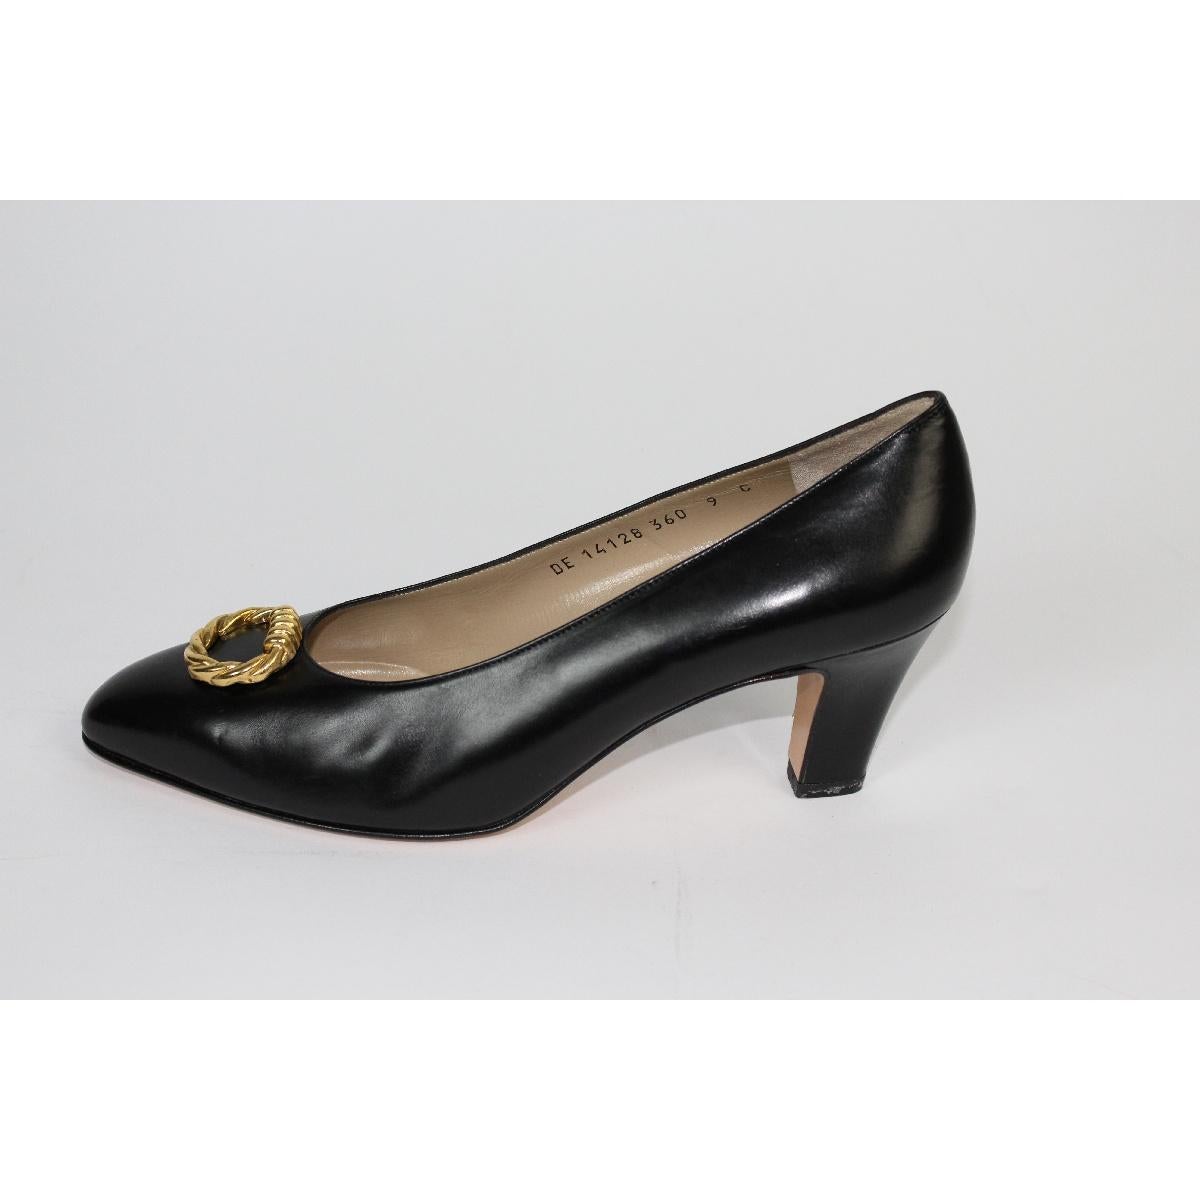 Salvatore Ferragamo women's shoes in black leather, small heel of 6 cm, golden clasp with logo, new shoes never worn. Made in Italy

Size 9 Us 39 It 6 Uk

Heel height: 6 cm
Code: DE 14128 360